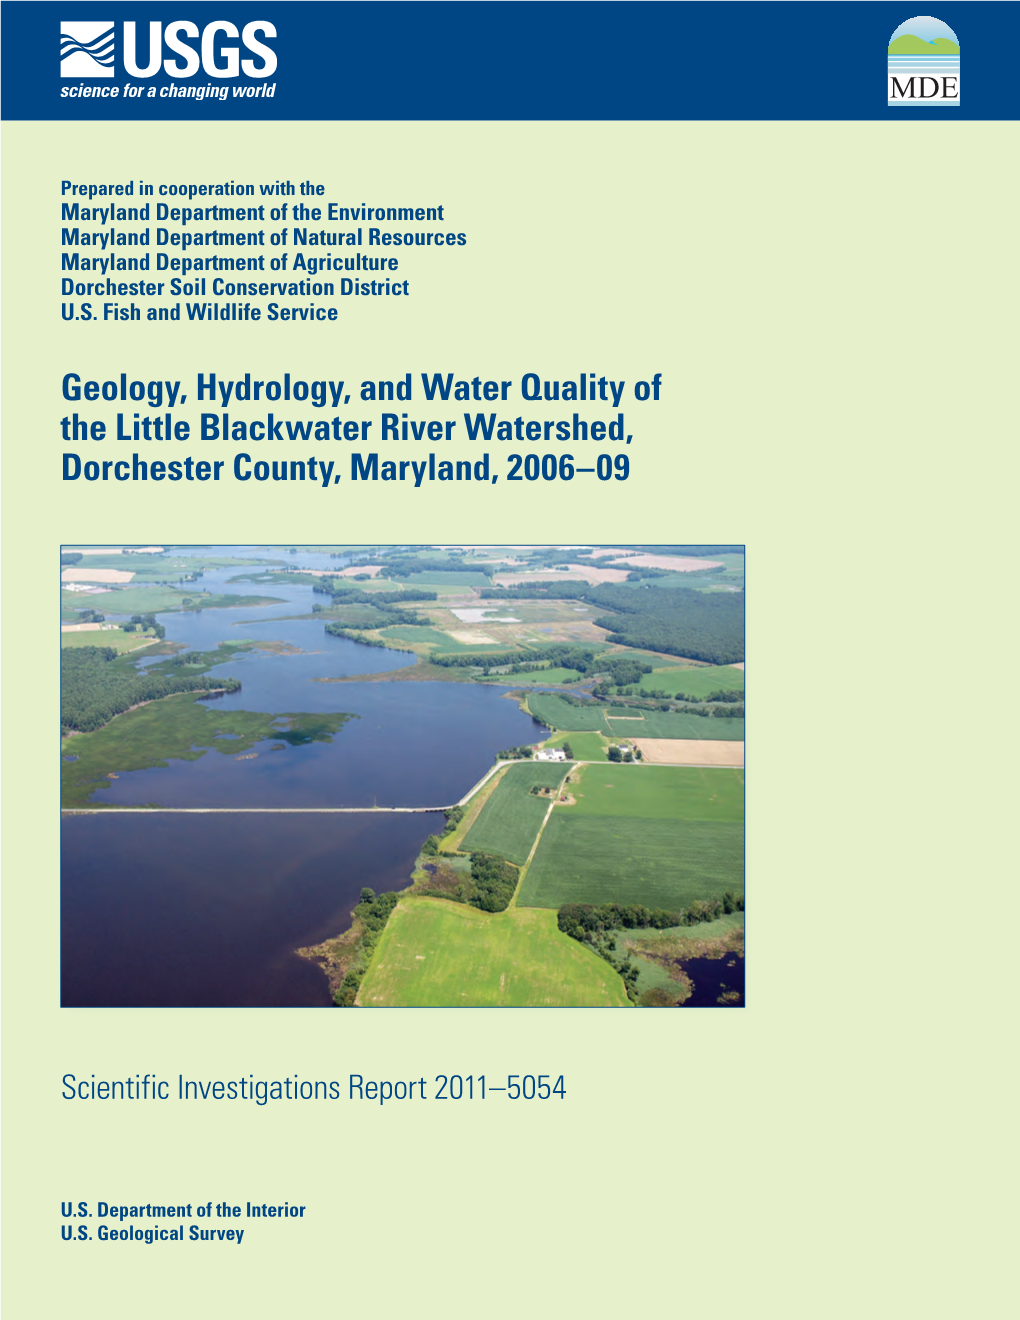 Geology, Hydrology, and Water Quality of the Little Blackwater River Watershed, Dorchester County, Maryland, 2006–09